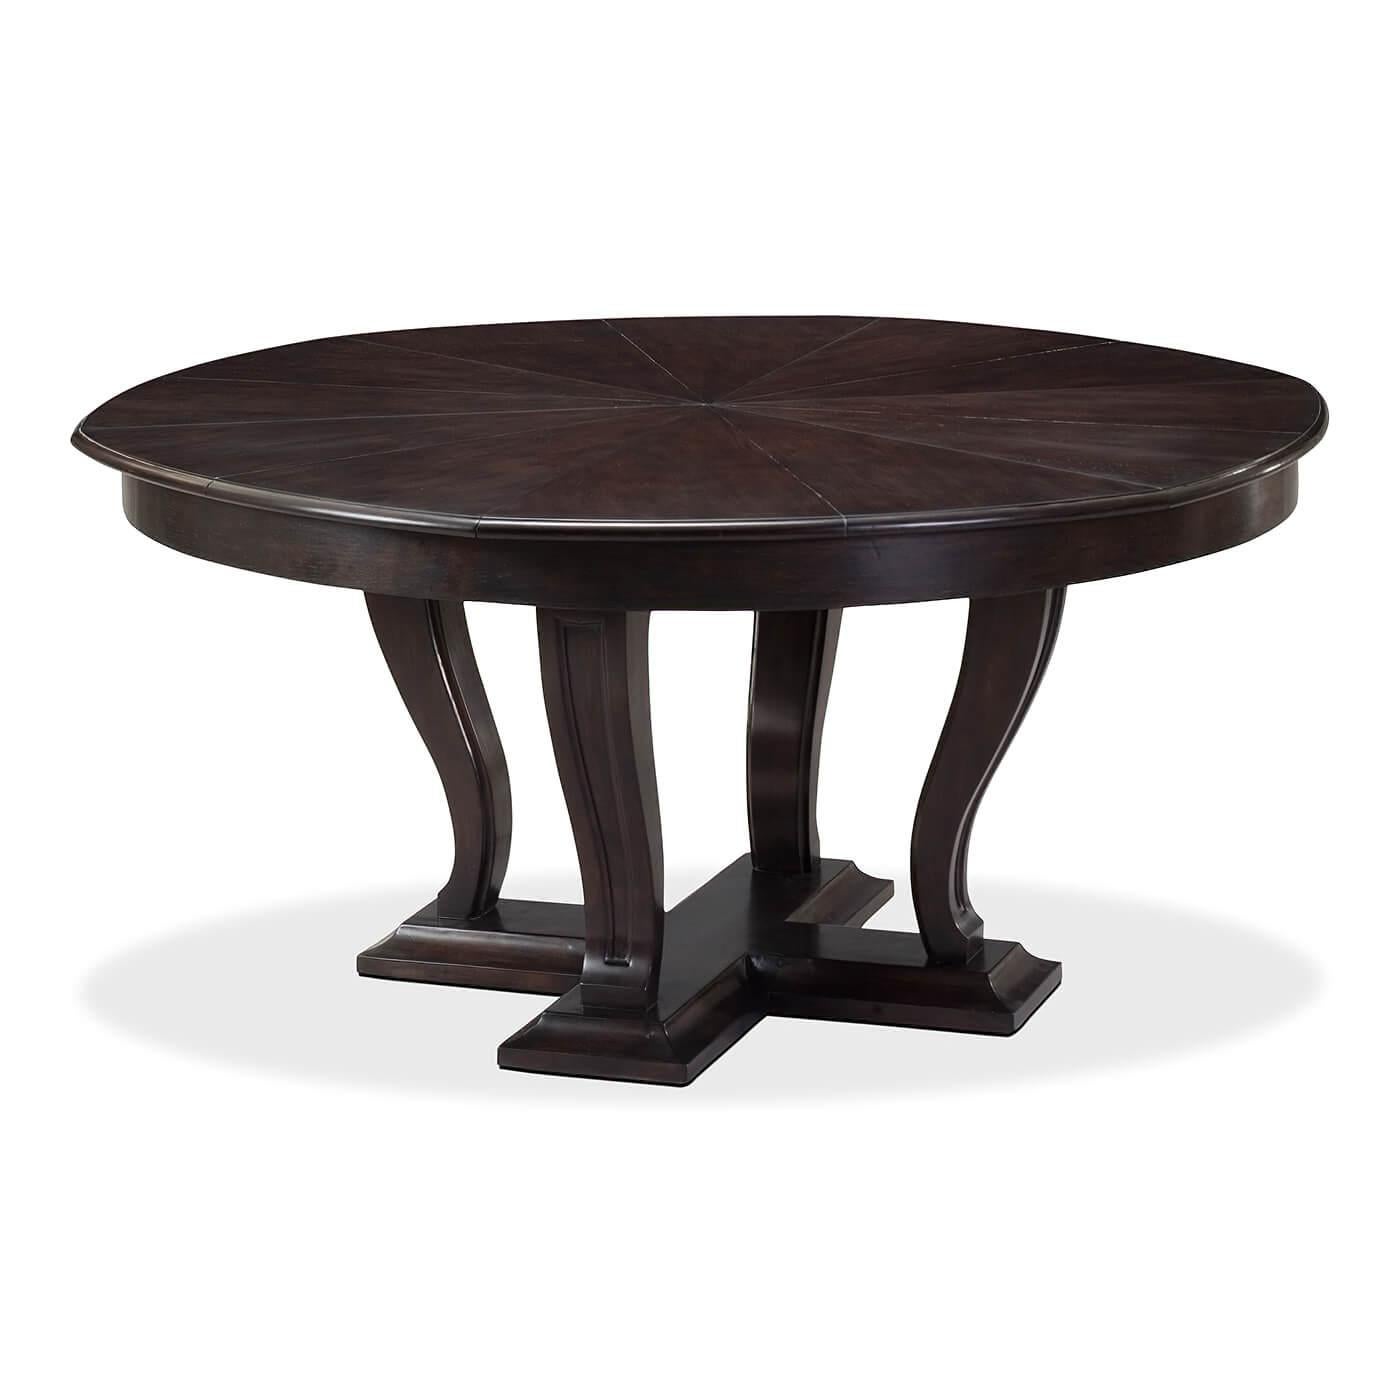 Art Deco Style dining table on a transitional styled base consisting of tapered serpentine curved legs that have been carved with an inset panel design. They sit on a platform base that has been framed with a bold cove shape. The top is radial